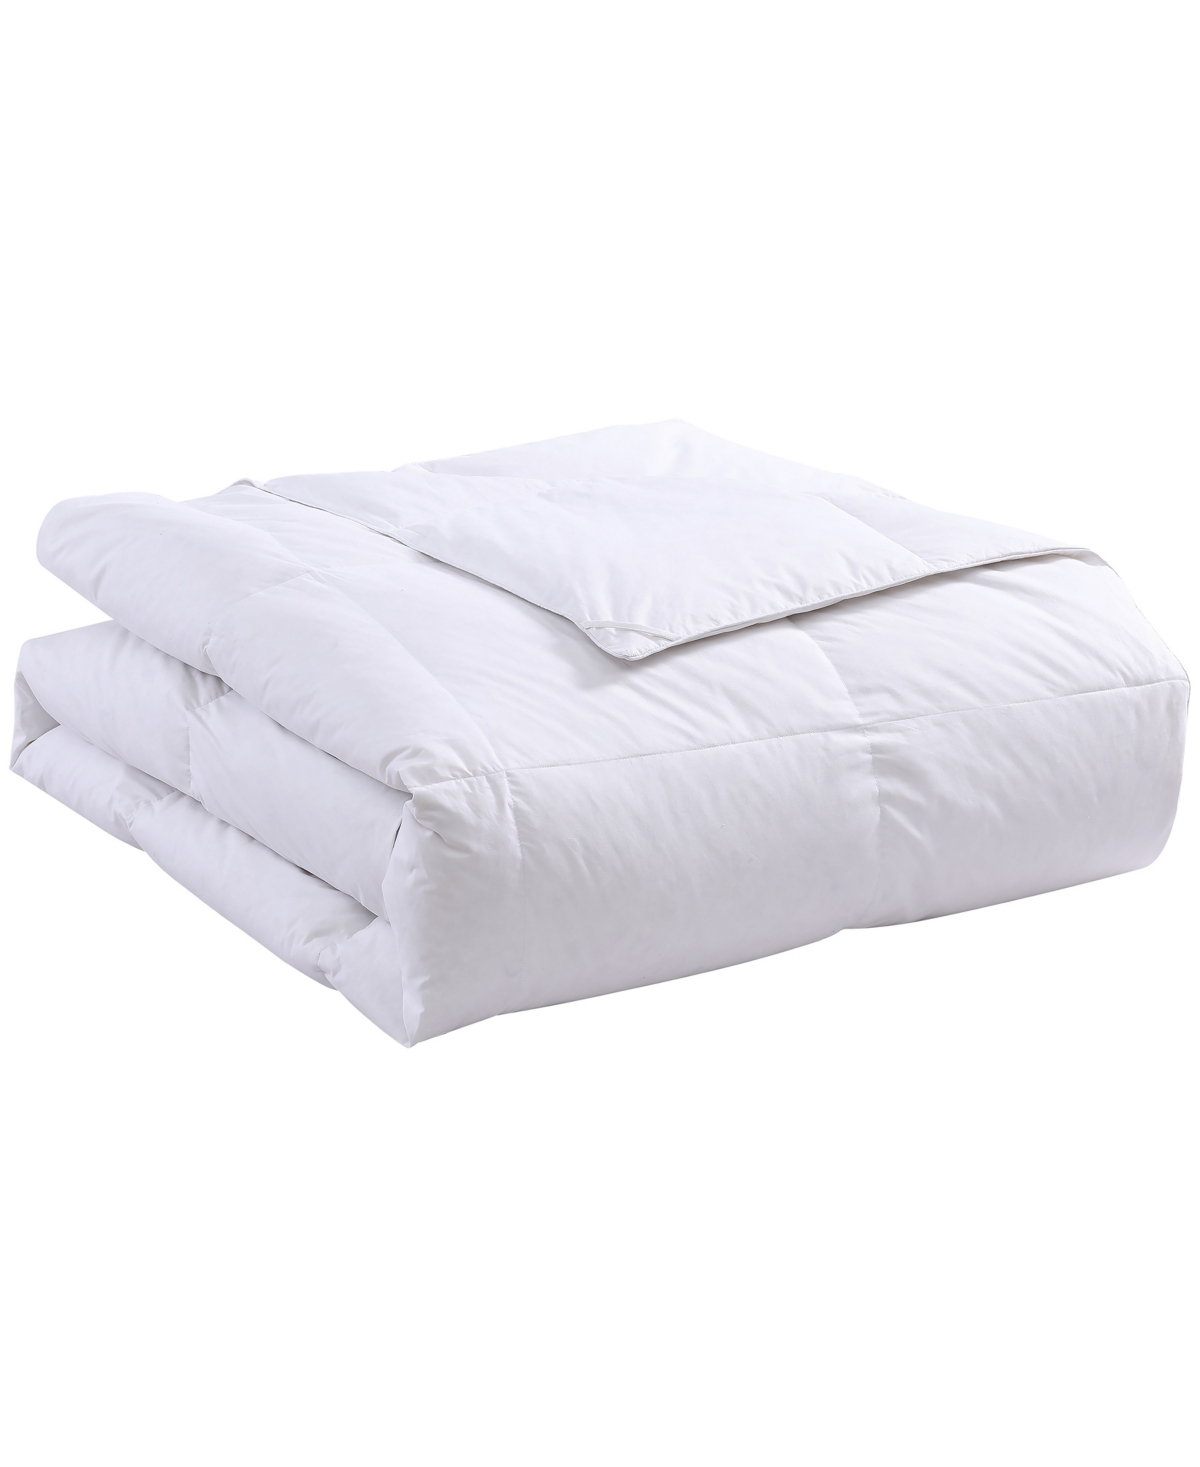 Serta Heiq Cooling White Feather & Down All Season Comforter, Full/queen